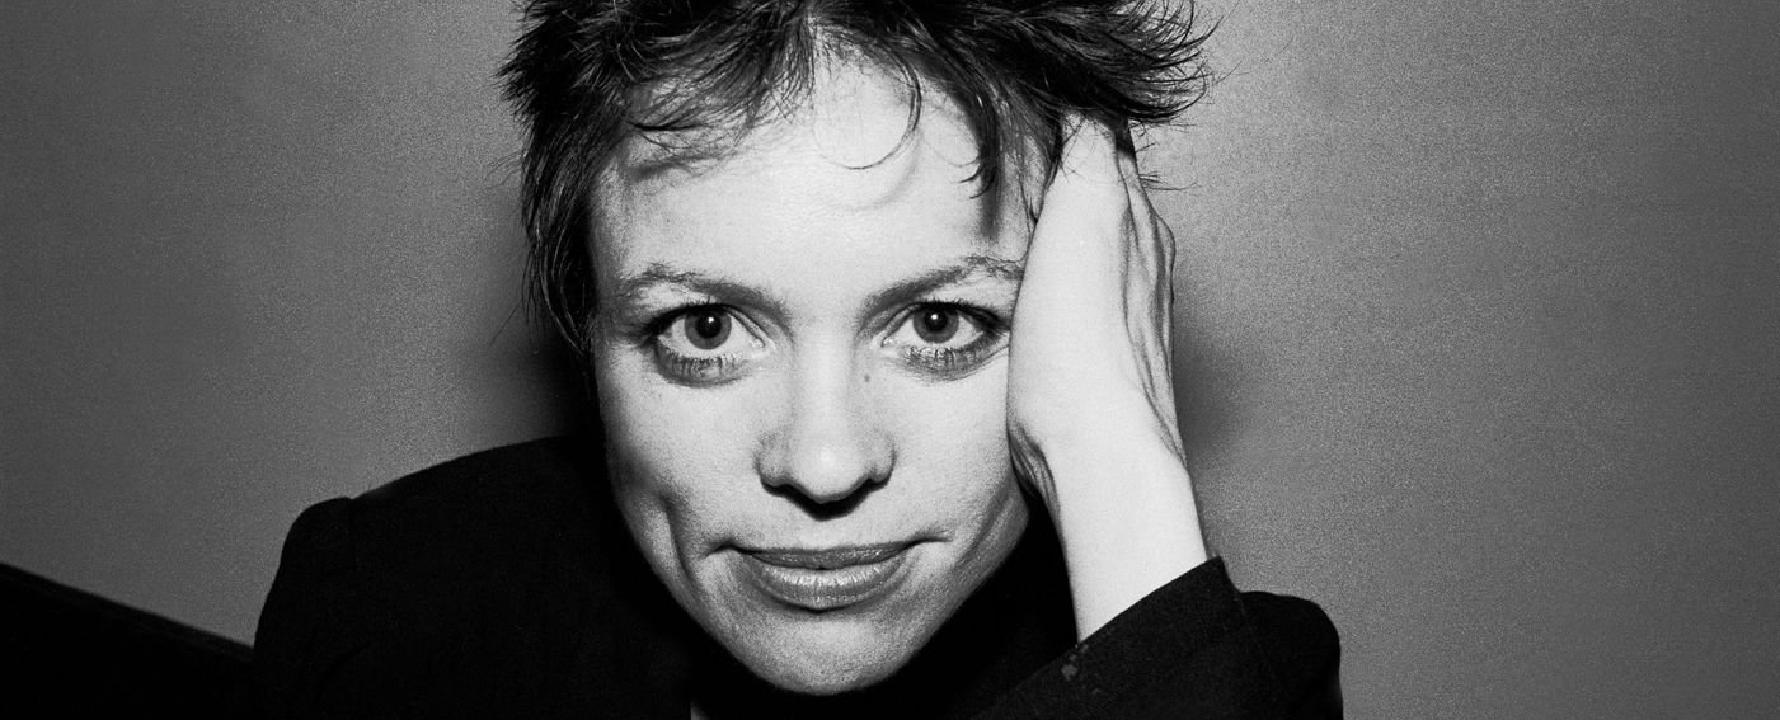 Promotional photograph of Laurie Anderson.